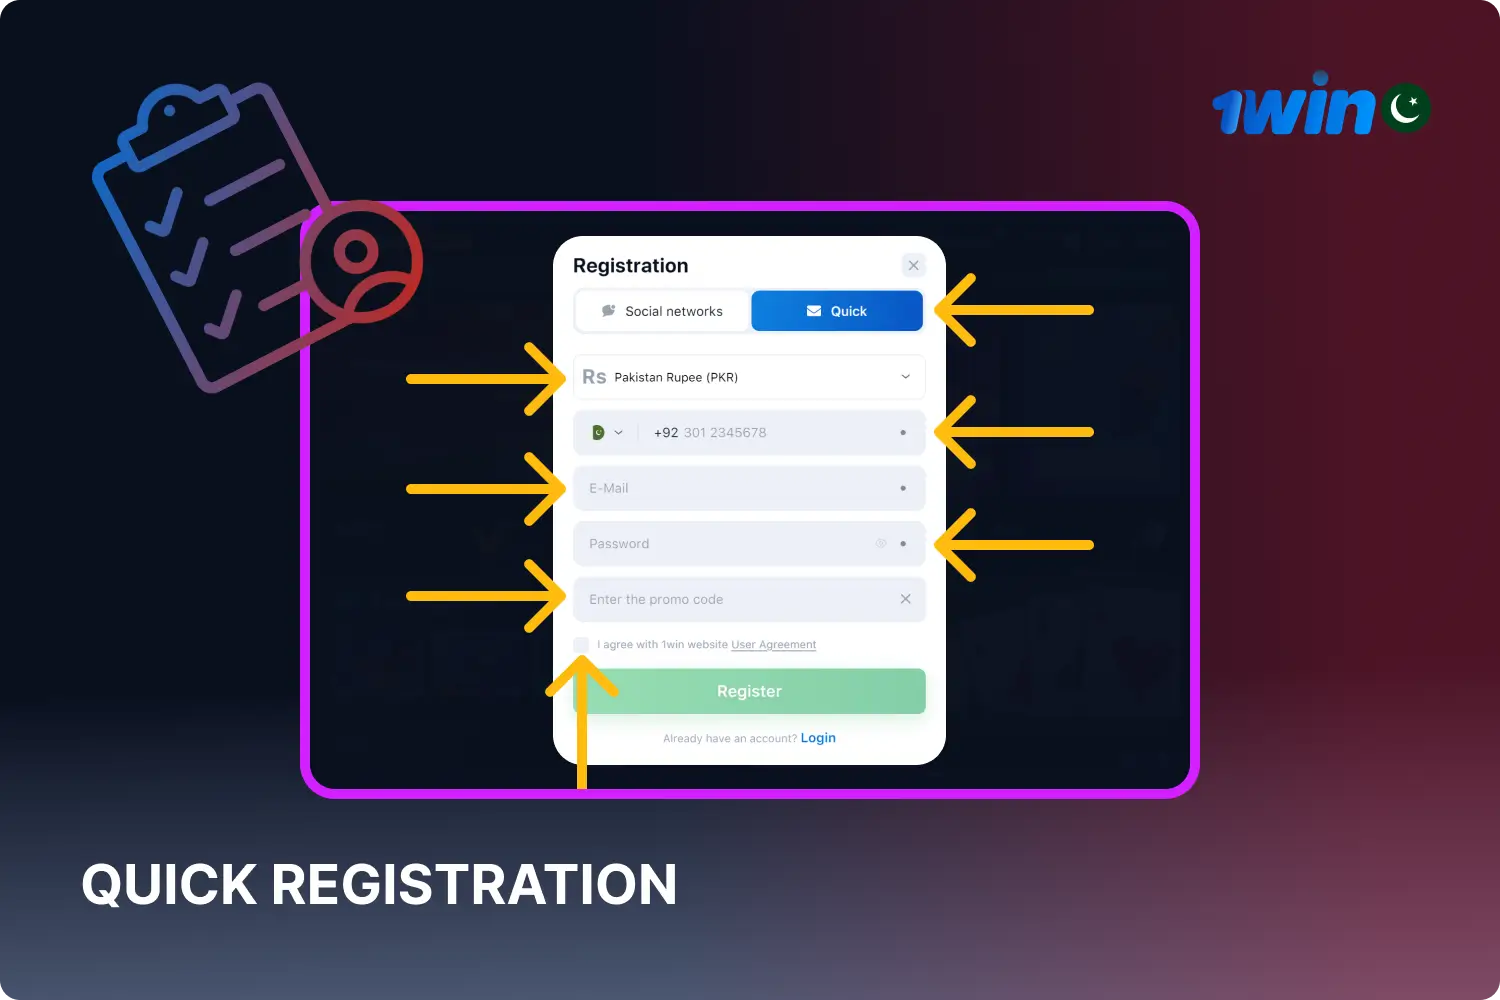 To quickly register for 1win, players from Pakistan need to select their currency, enter their phone number, email address and create a password